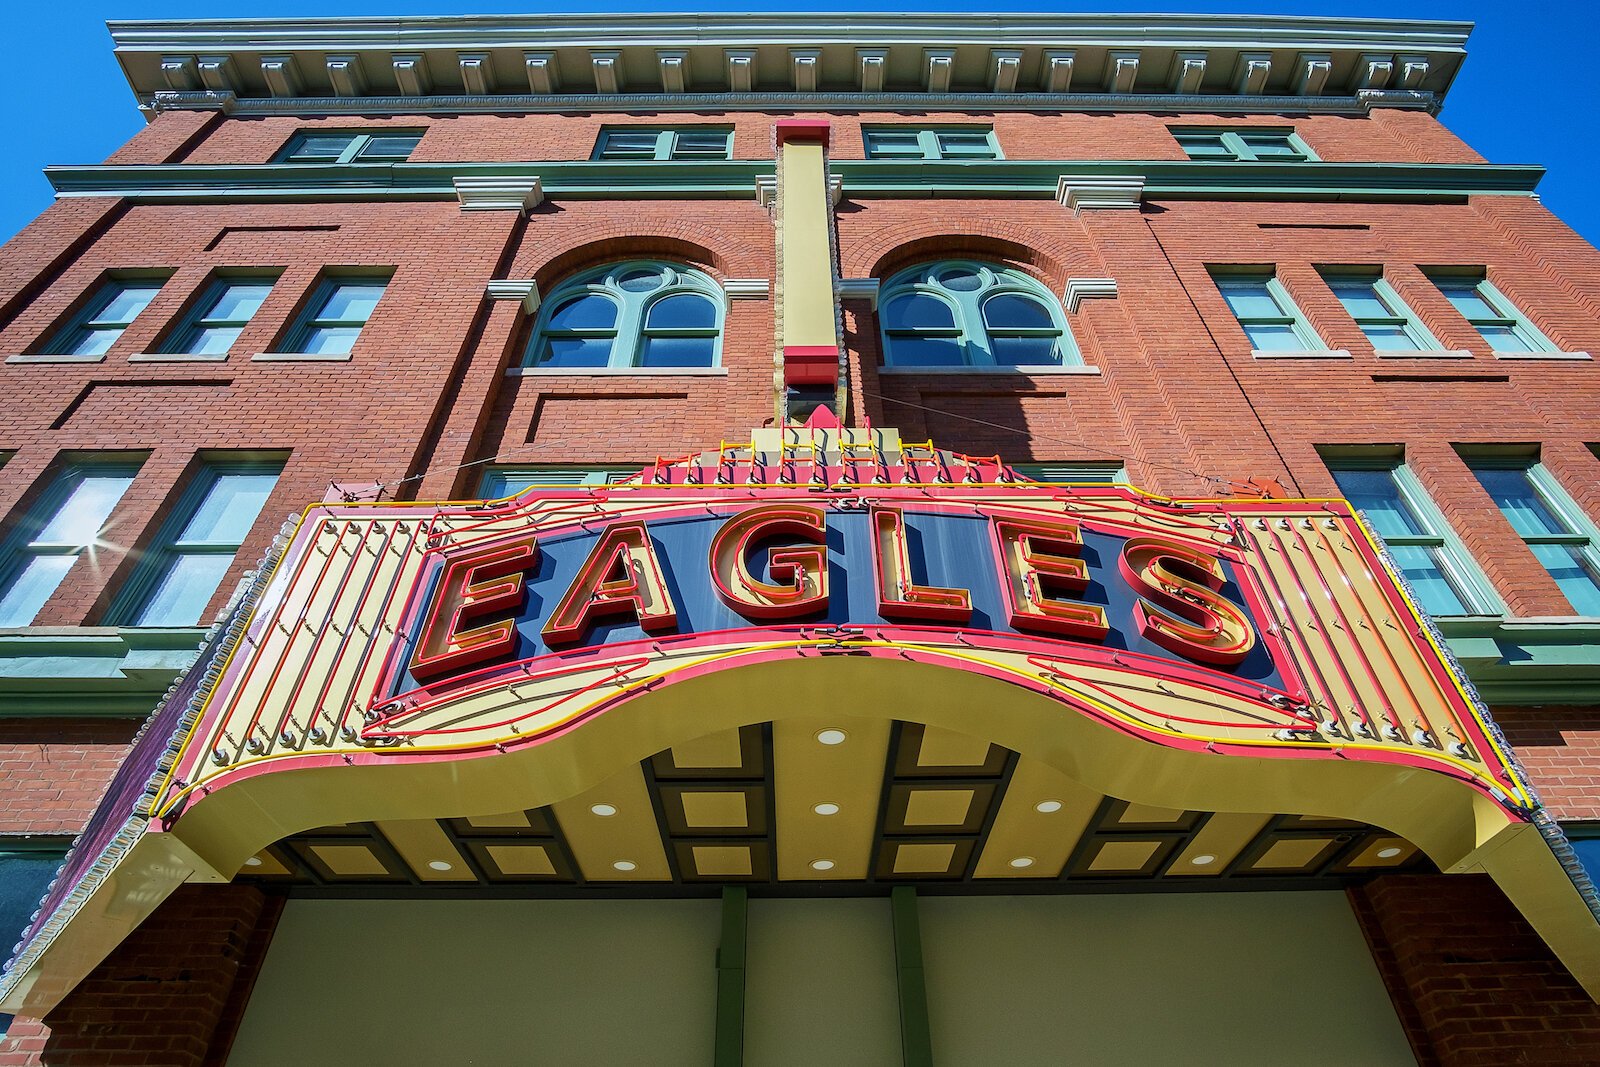 The fully renovated Eagles Theatre at 106 W. Market St. in Downtown Wabash.